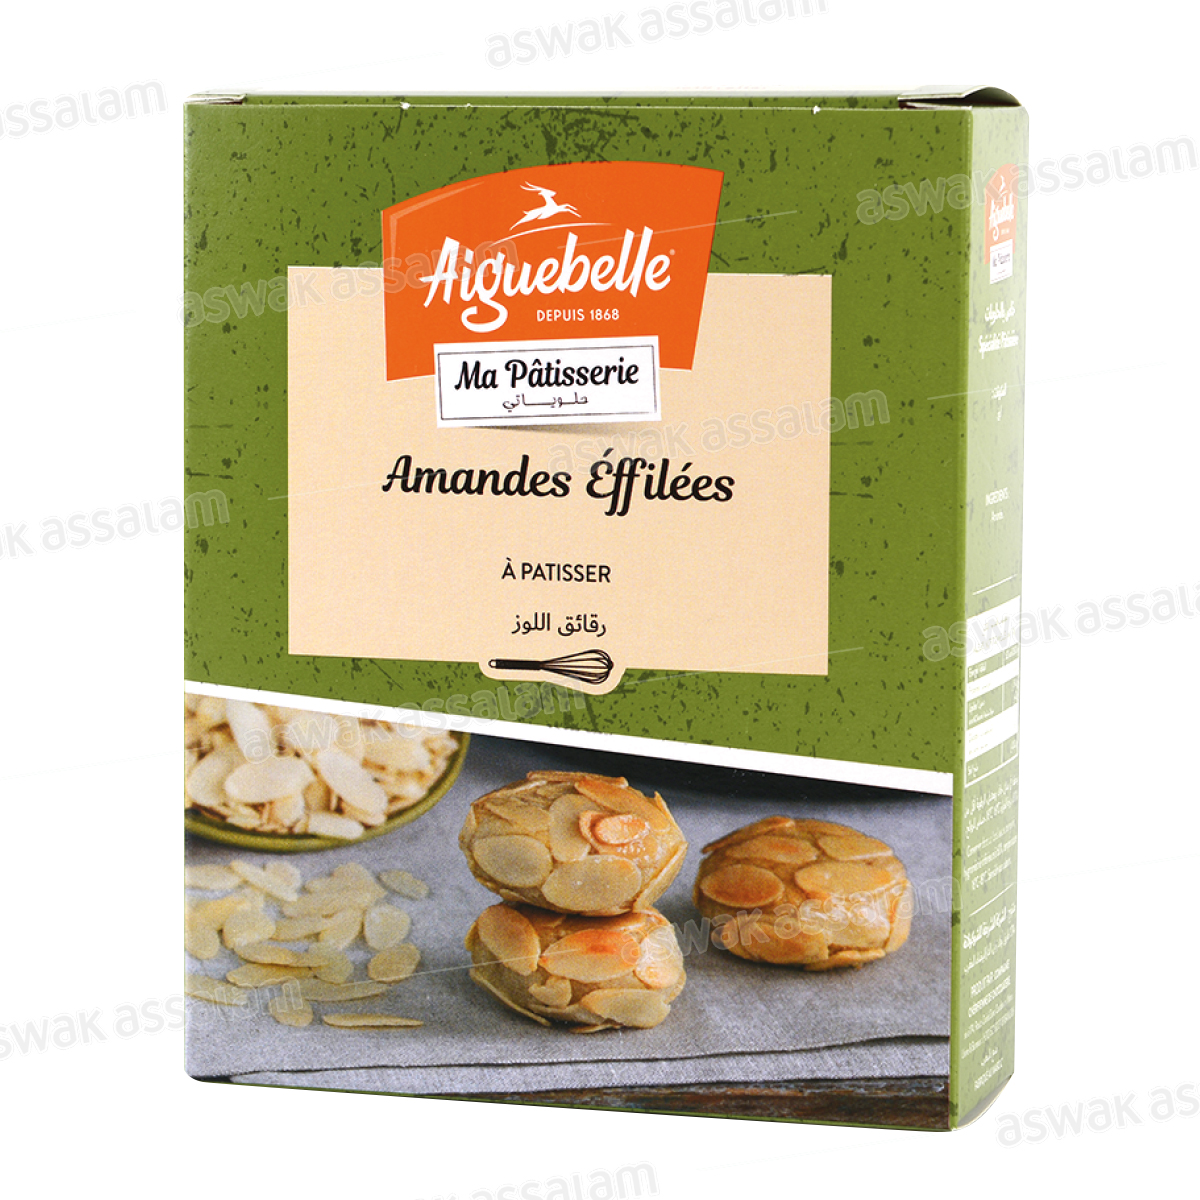 AMANDES EFFILEES 100G AIGUEBELLE